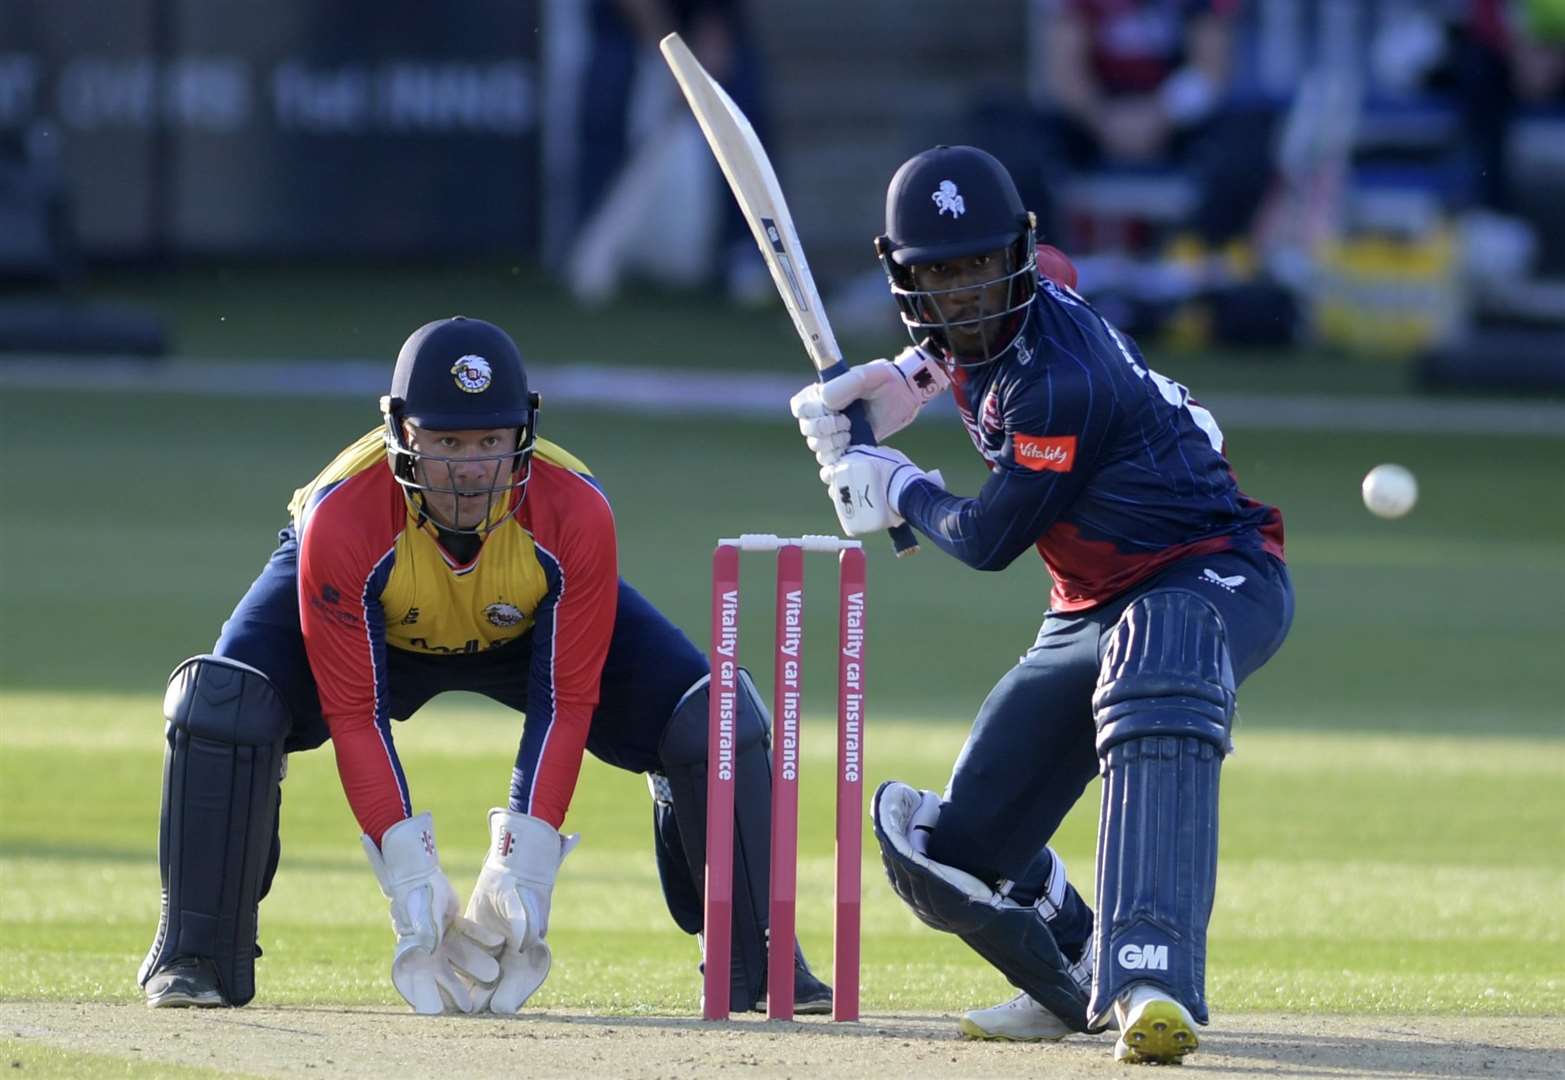 Daniel Bell-Drummond helped get Kent off to a good start in the powerplay against Essex. Picture: Barry Goodwin